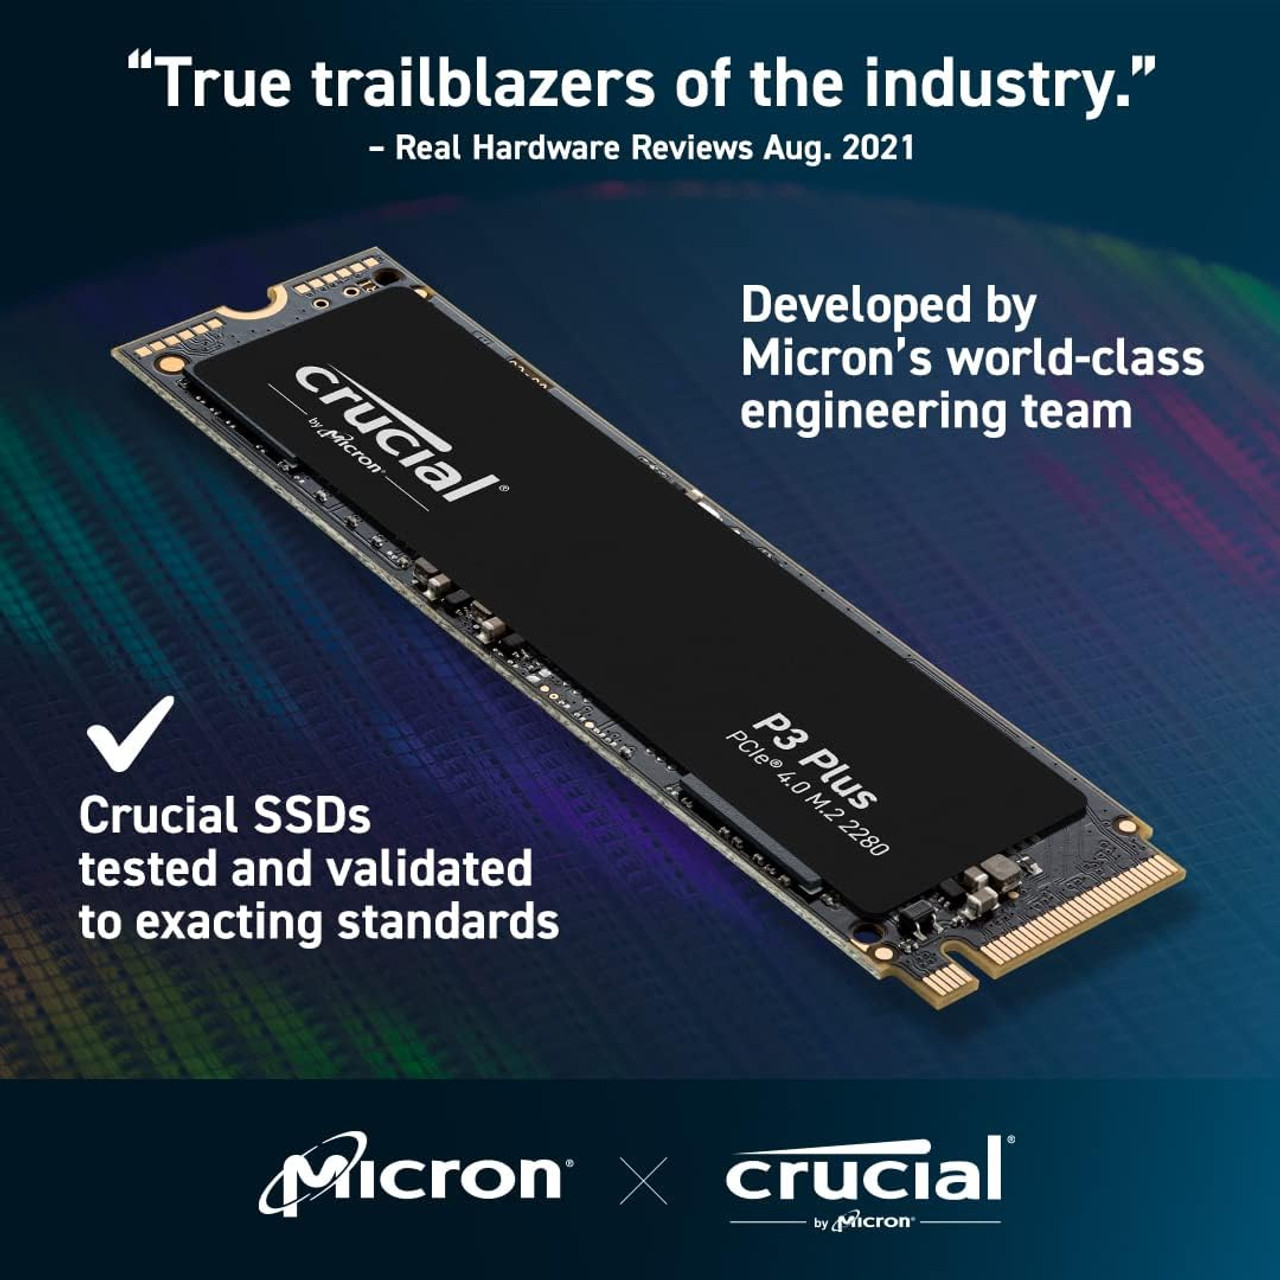 Crucial P3 Plus 500GB PCIe Gen4 3D NAND NVMe M.2 SSD up to 4700MB/s Solid State Drive CT500P3PSSD8